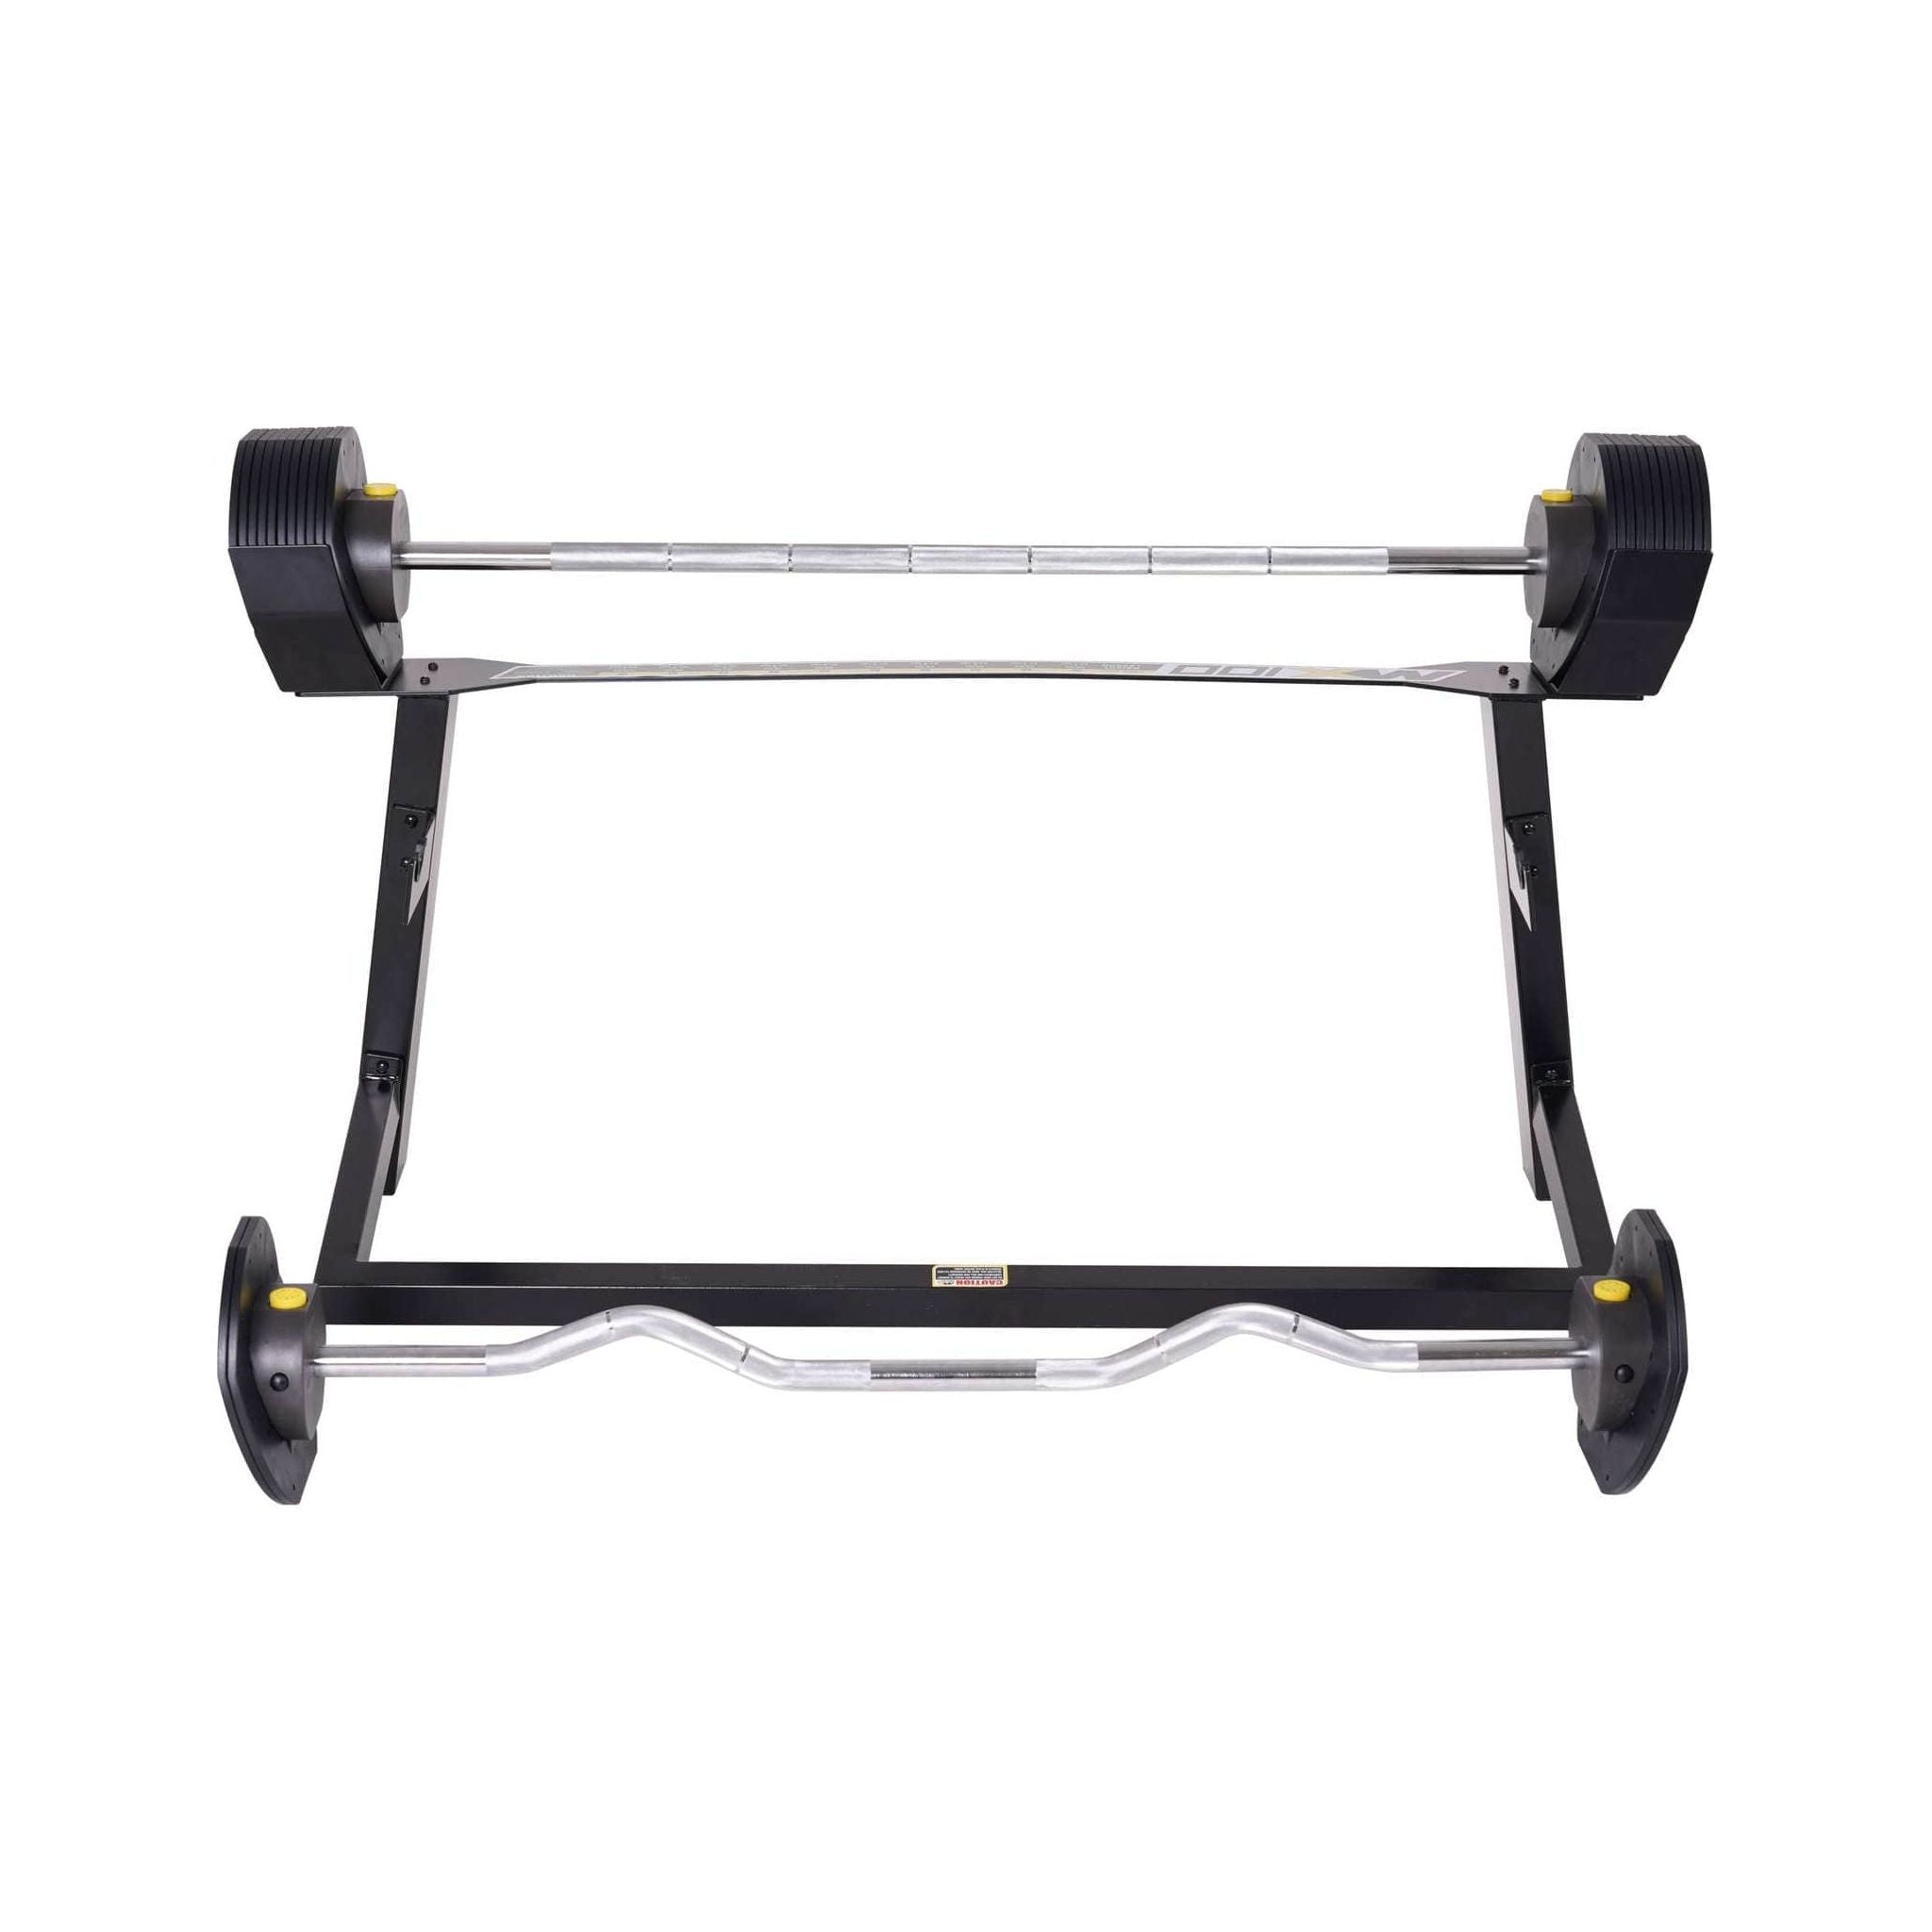 adjustable barbell mx select mx80 rapid change curl bar system how heavy is a curling bar adjustable curl bar mx 100 100lbs 100 lbs 100lb 100 lb adjustable curl bar adjustable bar bell rapid change 